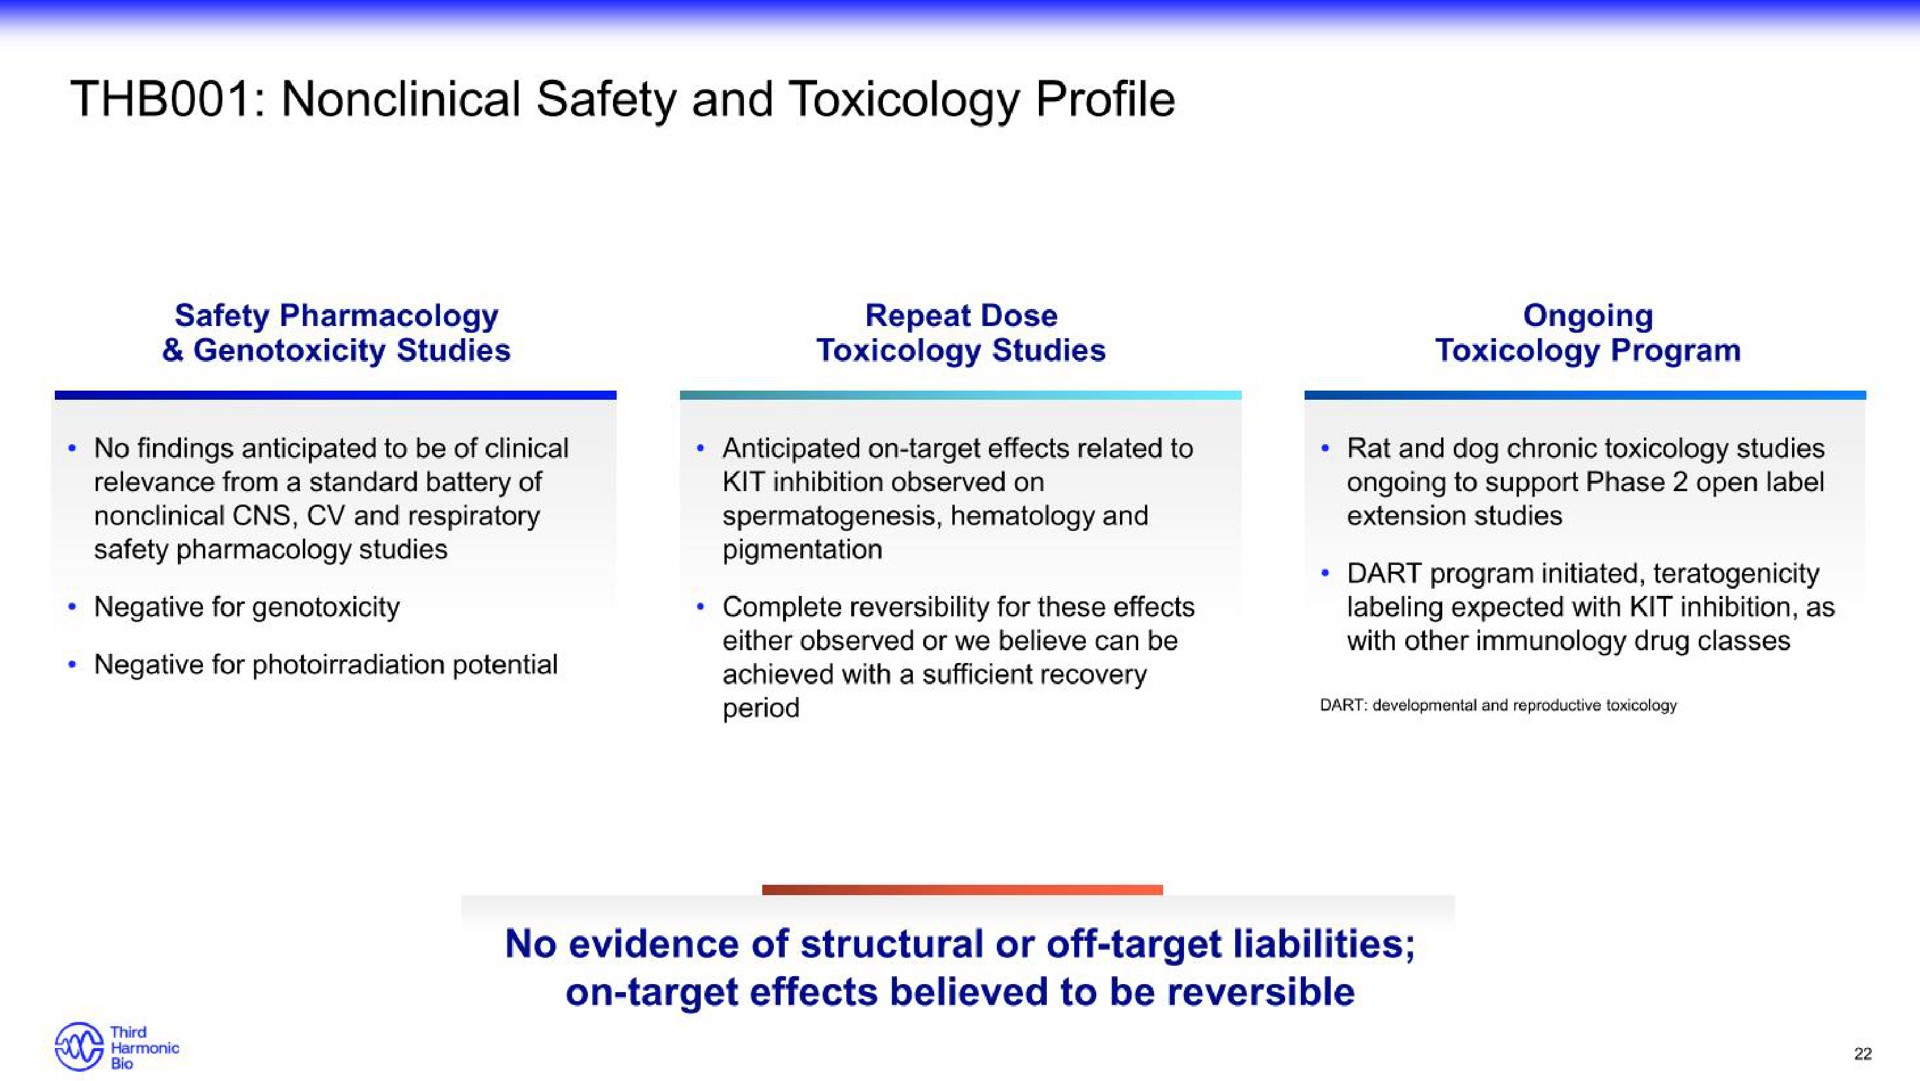 nonclinical safety and toxicology profile | Third Harmonic Bio